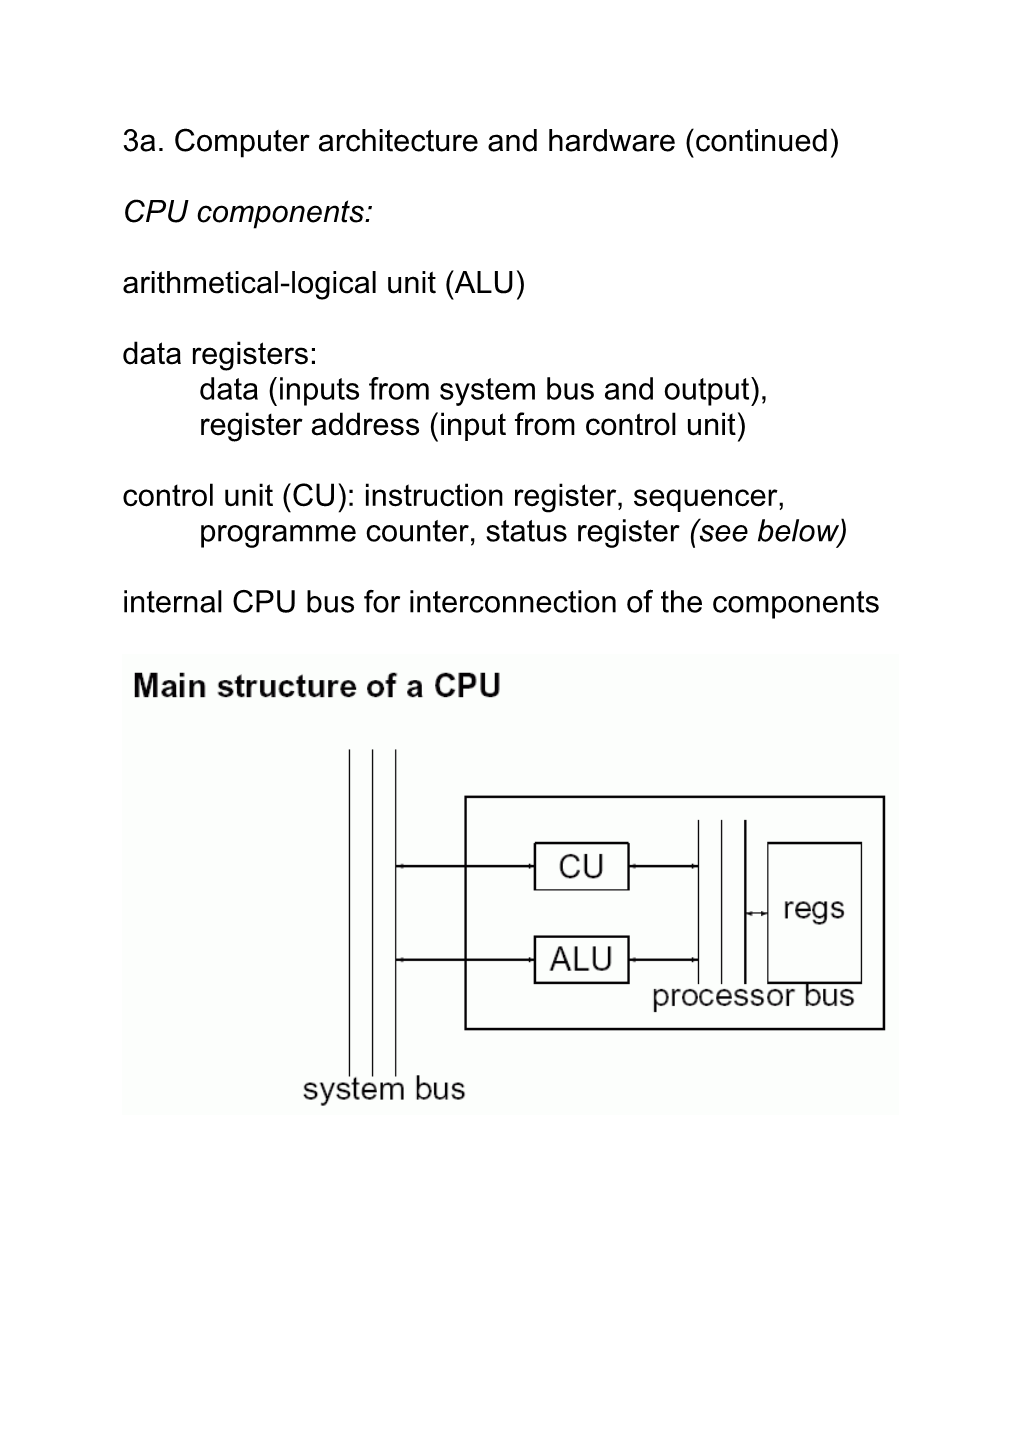 3A. Computer Architecture and Hardware (Continued)